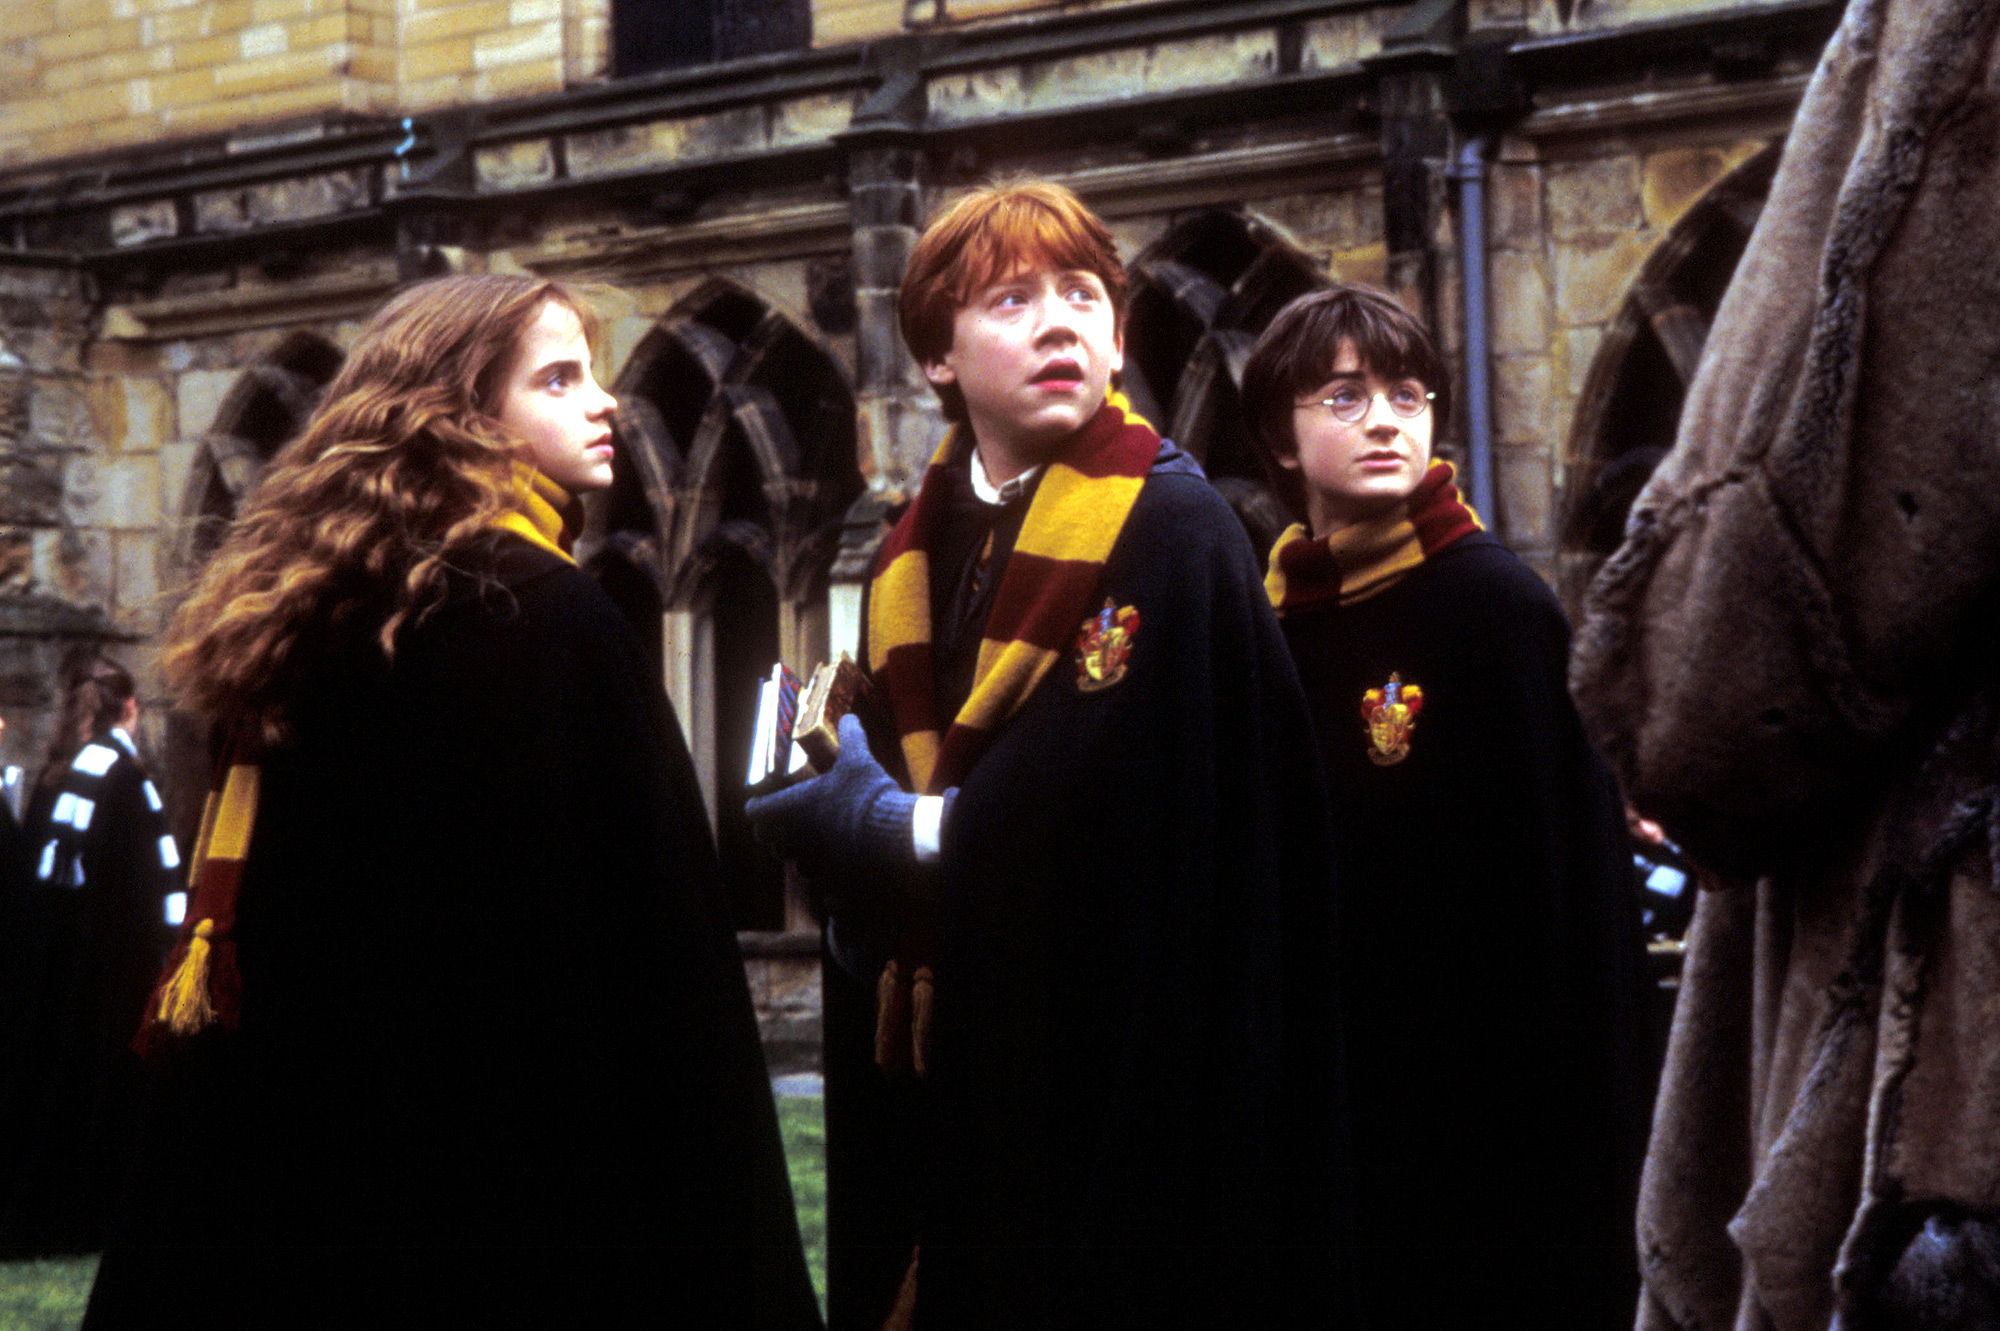 Harry Potter' TV Show Adaptation Ordered at HBO Max